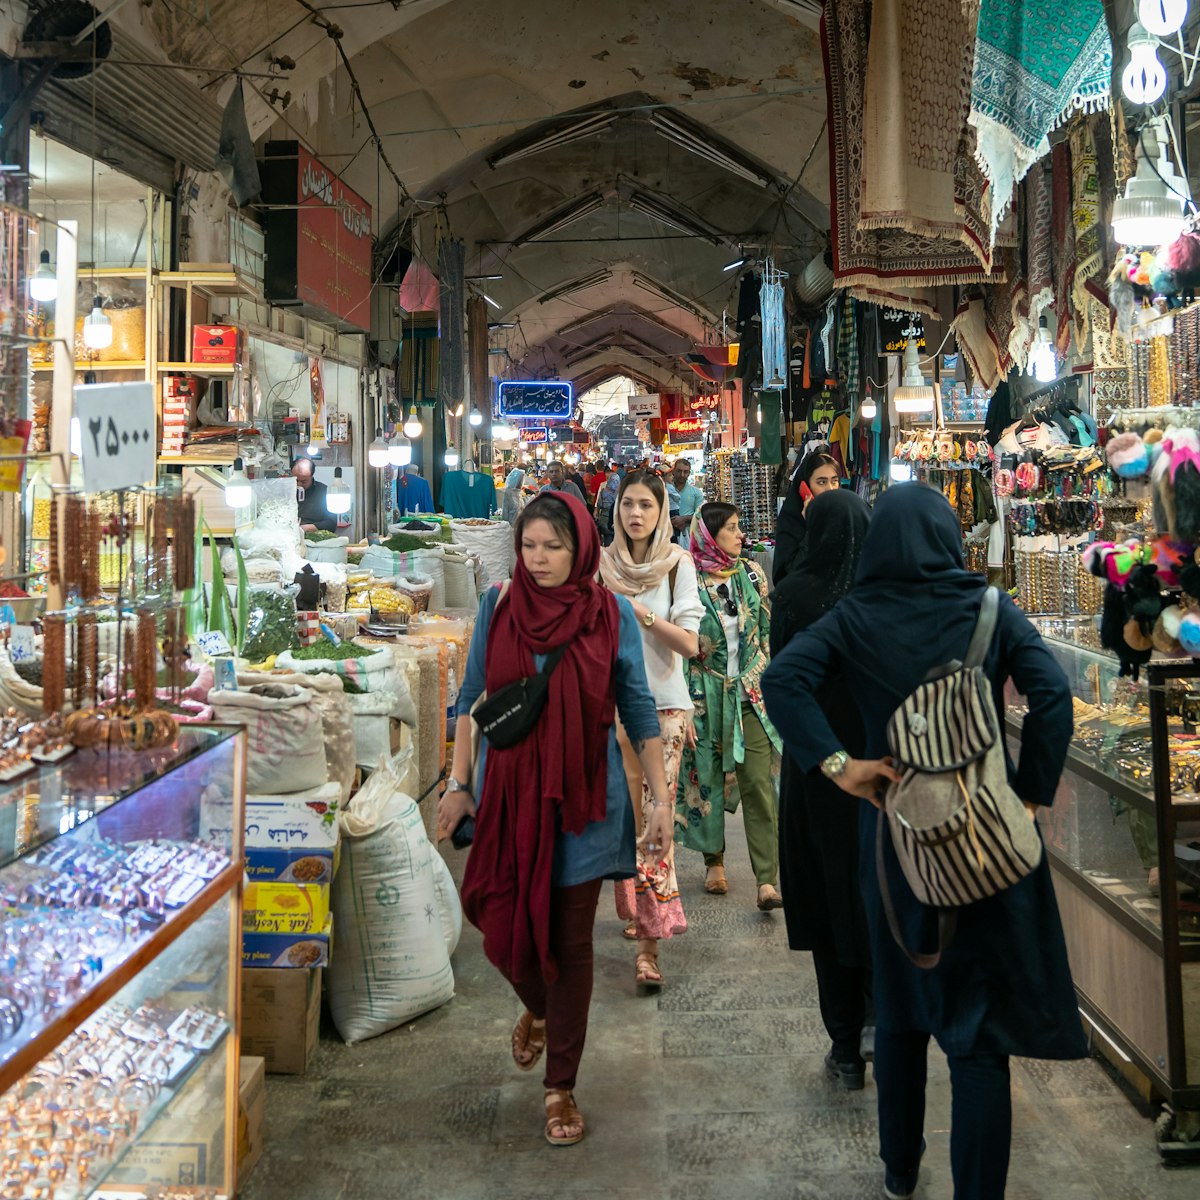 Isfahan, Iran - May 2019: Grand bazaar of Isfahan, also known as Bazar Bozorg with tourists and local people shopping, historical market; Shutterstock ID 1670251840; purchase_order: 65050; job: ; client: ; other:
1670251840